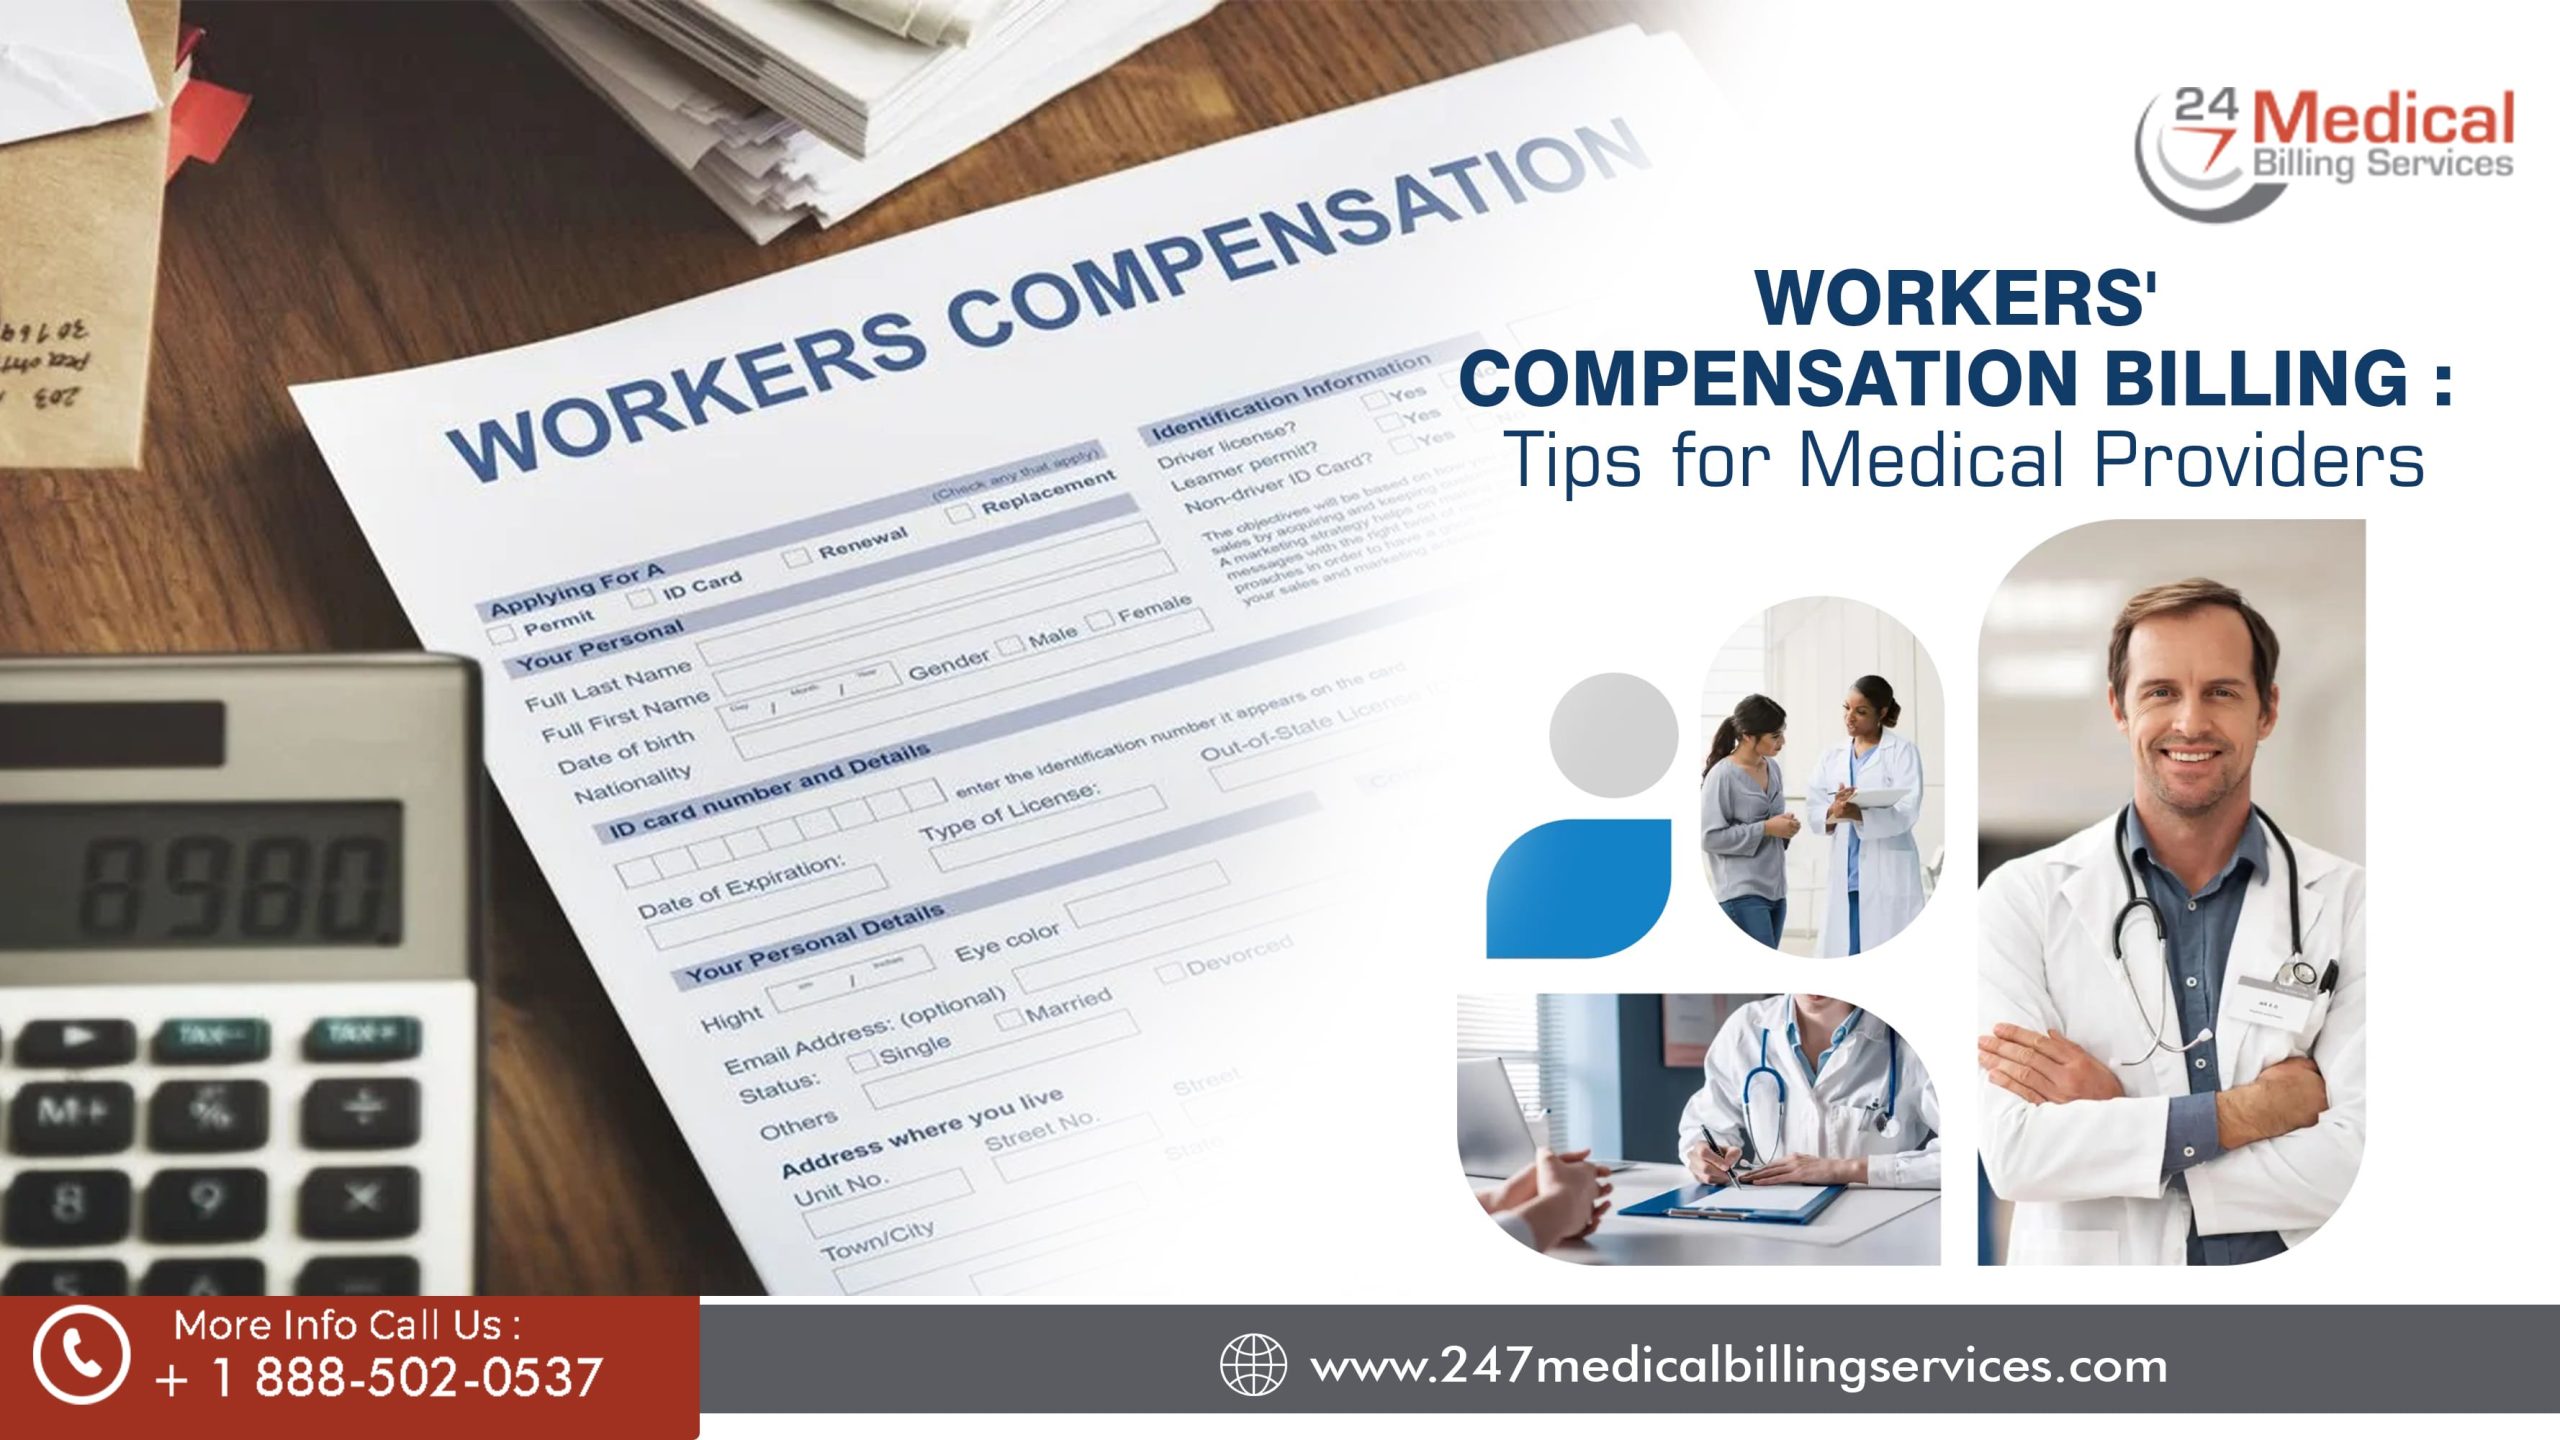  Workers’ Compensation Billing: Tips for Medical Providers